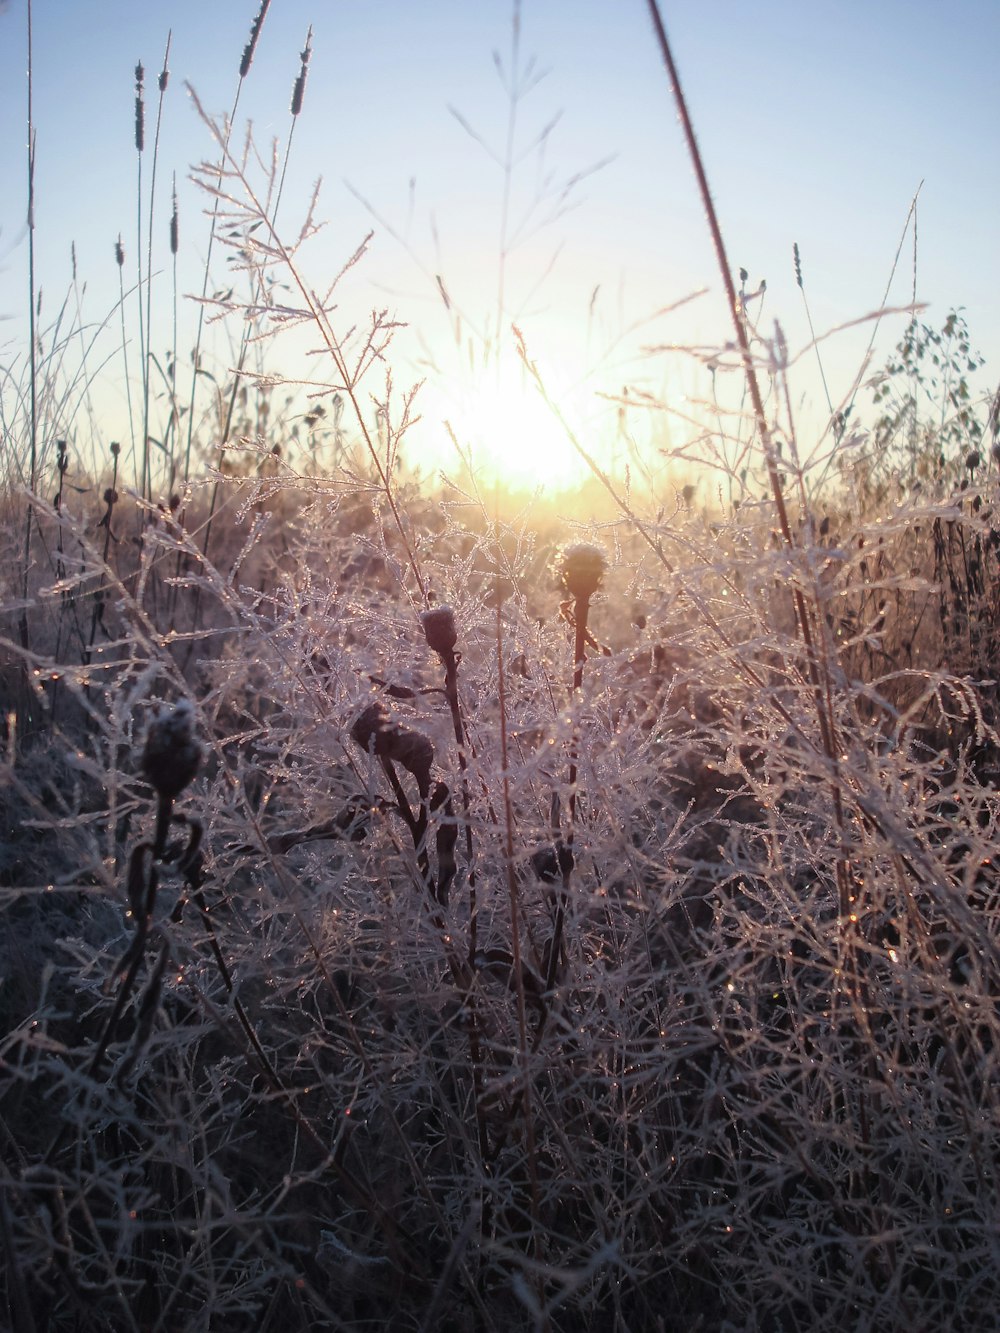 the sun is shining through the frosty grass